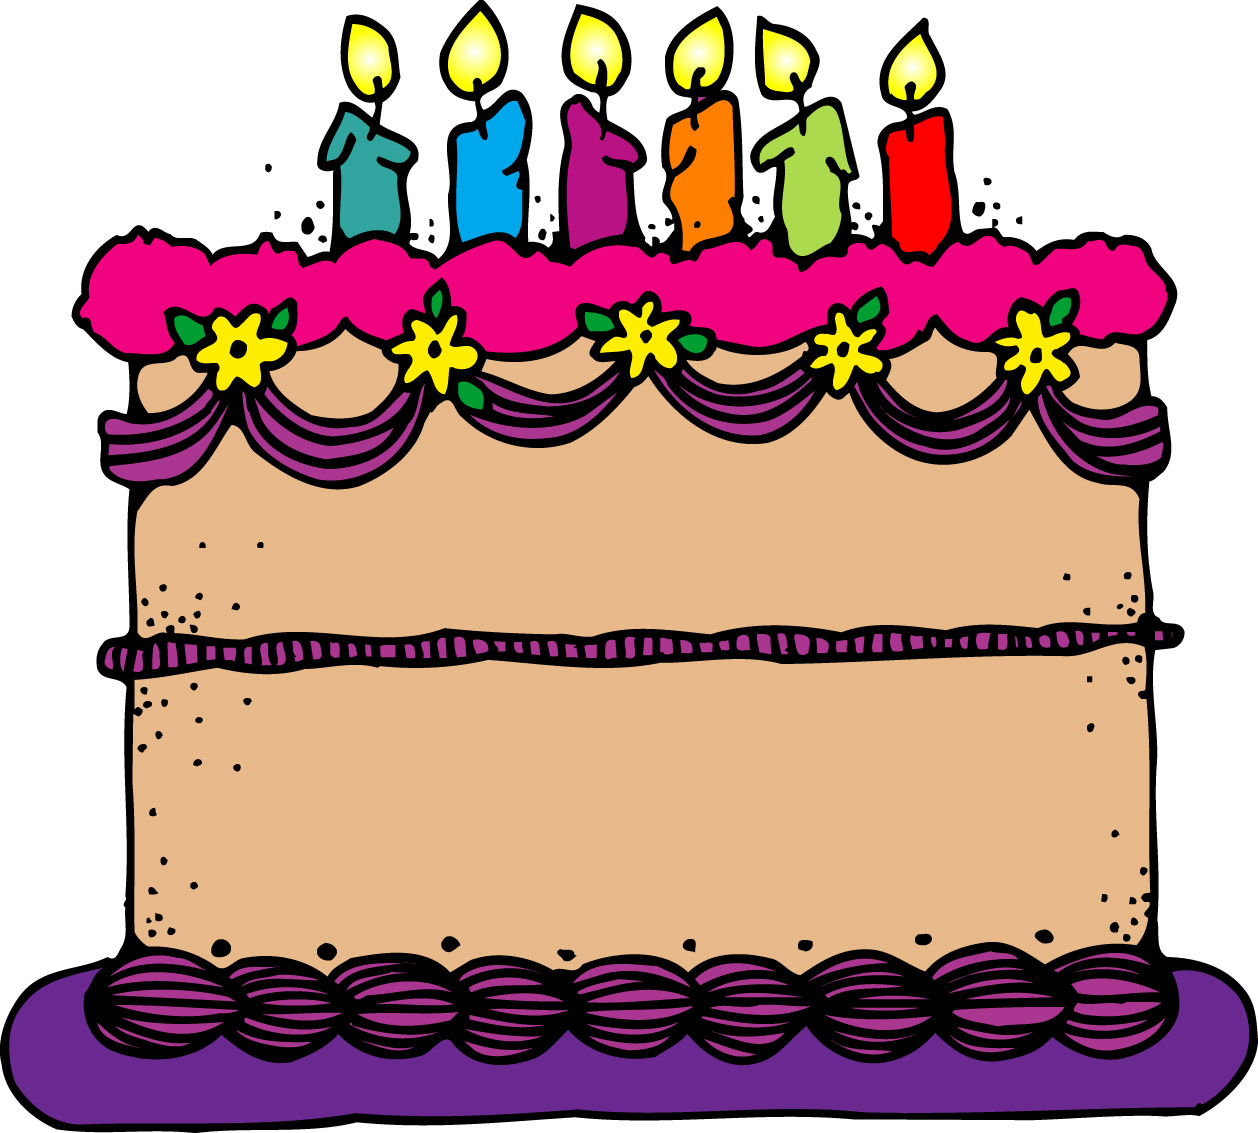 Birthday Cakes Clip Art Images - Clipart library